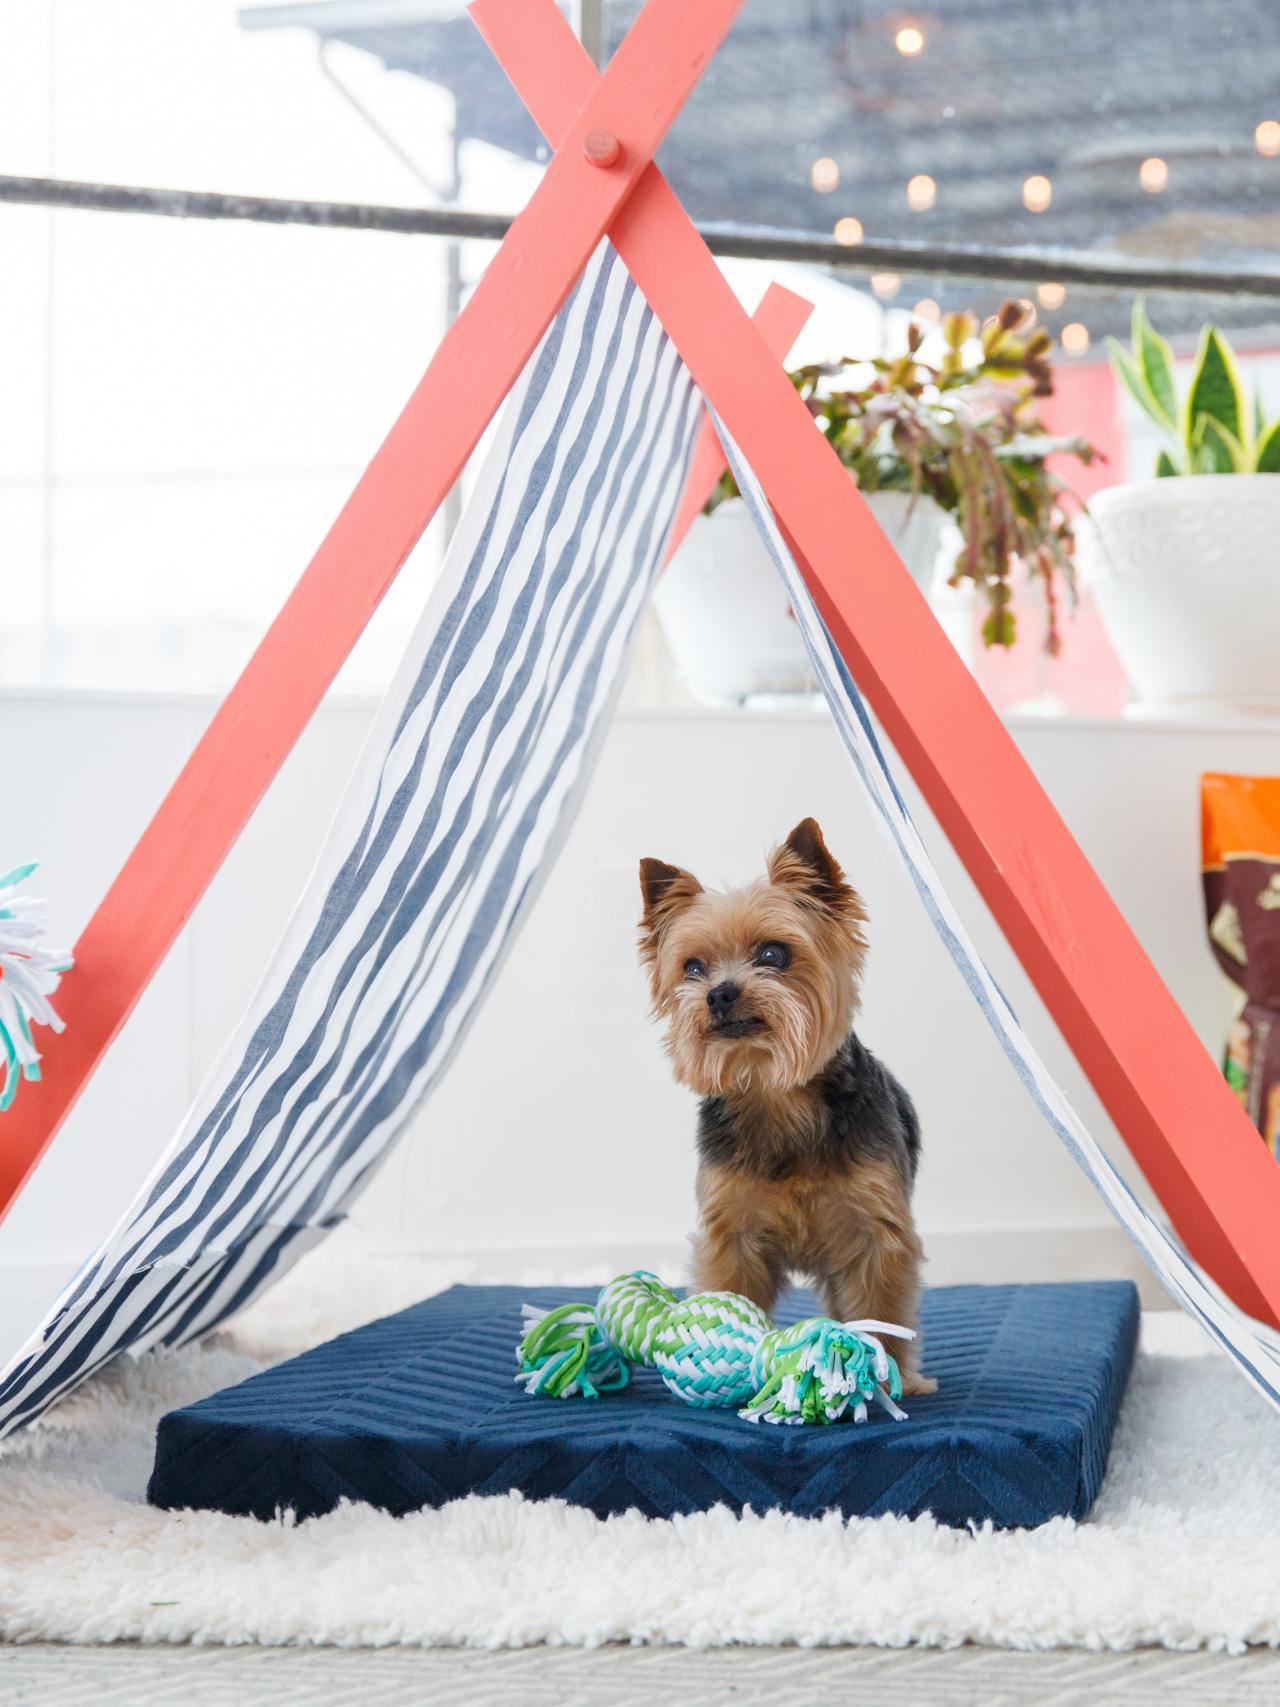 Create Your Own Dog Tent For Simple Outdoor Shade | HGTV